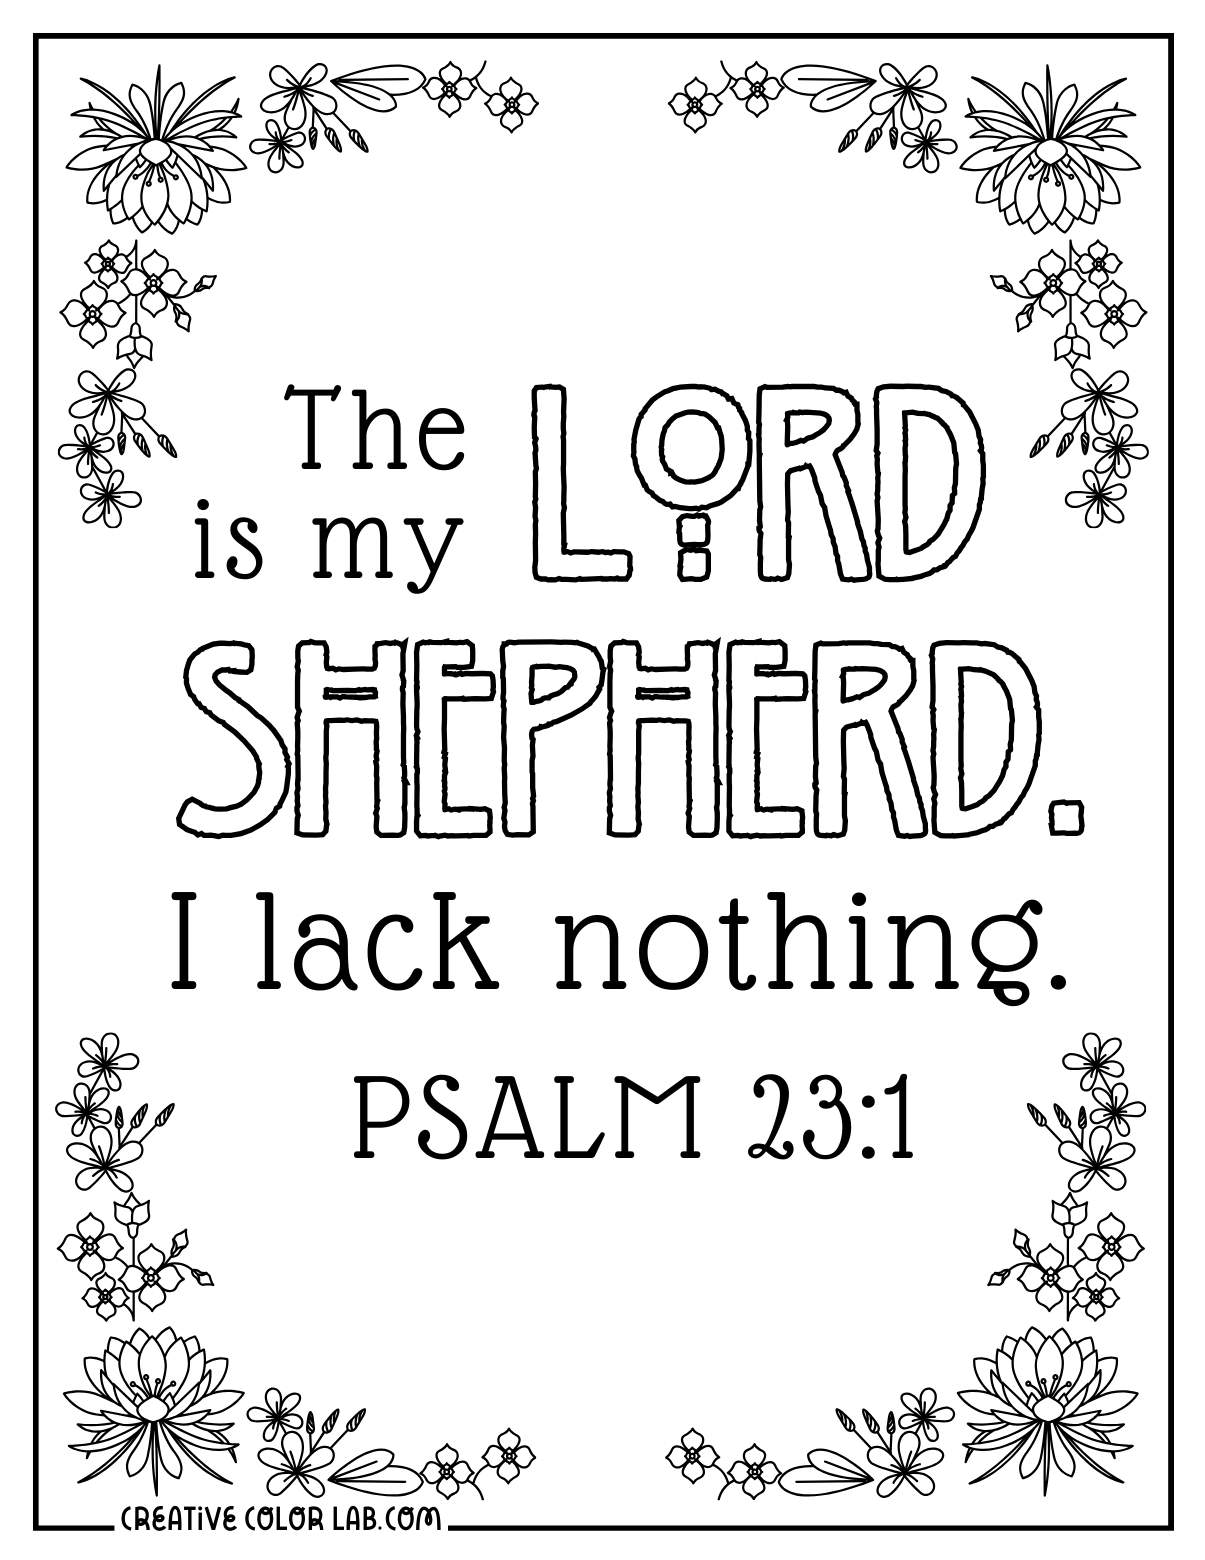 Floral bible verse coloring page about Psalm 23:1.